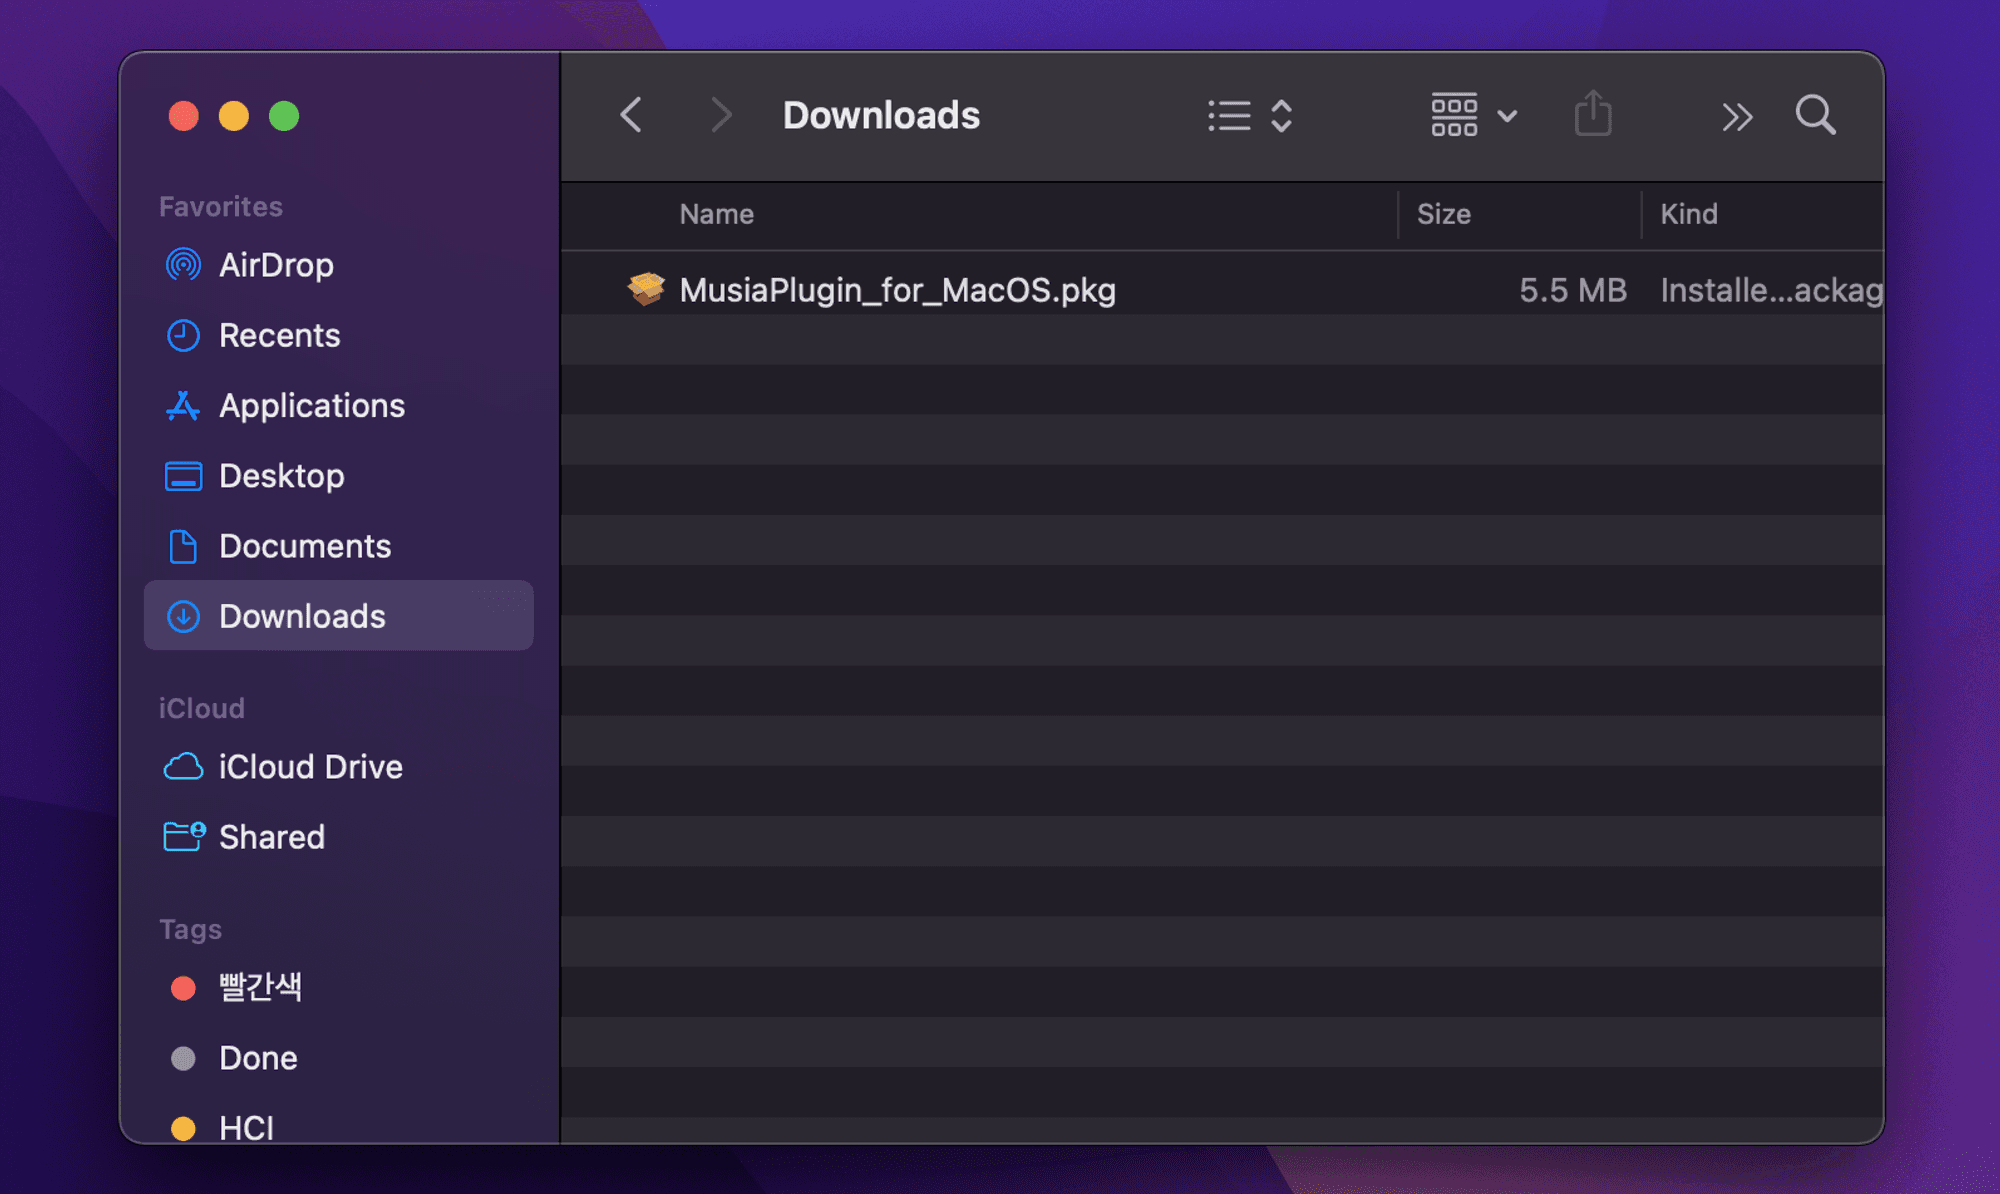 Downloads folder on your computer